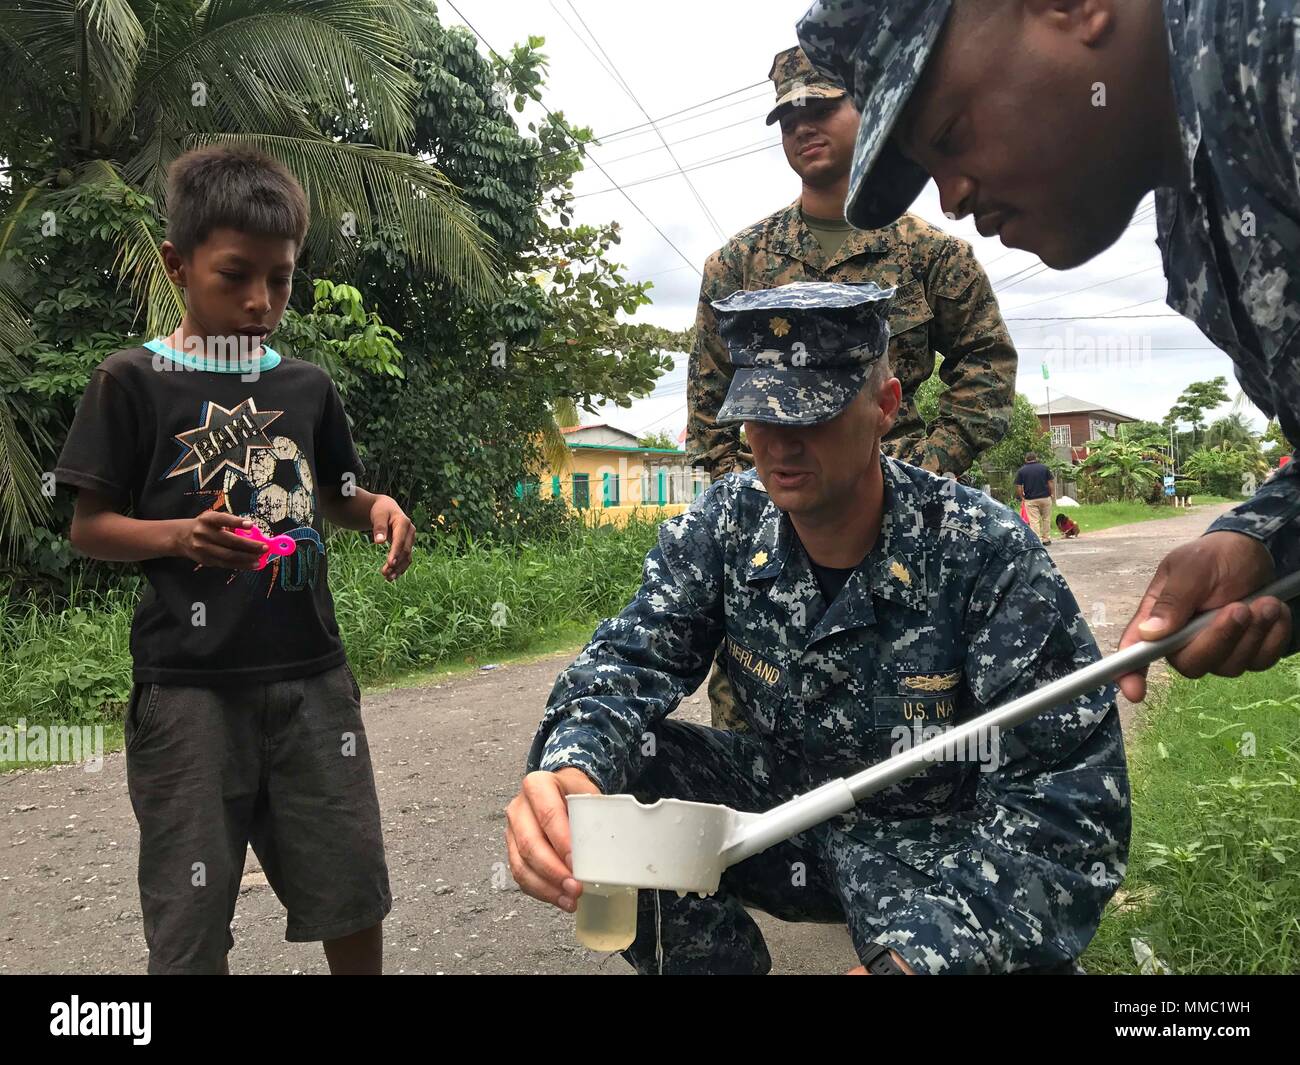 171006-A-QE286-0032 PUERTO BARRIOS, Guatemala (Oct. 6, 2017) A local child watches Hospital Corpsman 1st Class Dominic Ladmirault, right, and Lt. Cmdr. Ian Sutherland, both assigned to Navy Entomology Center of Excellence, catch mosquito larvae at Clinico Salud Del Puerto Barrios, a local health clinic, during Southern Partnership Station 17 (SPS 17). SPS 17 is a U.S. Navy deployment executed by U.S. Naval Forces Southern Command/U.S. 4th Fleet, focused on subject matter expert exchanges with partner nation militaries and security forces in Central and South America. (U.S. Army photo by SPC Ju Stock Photo